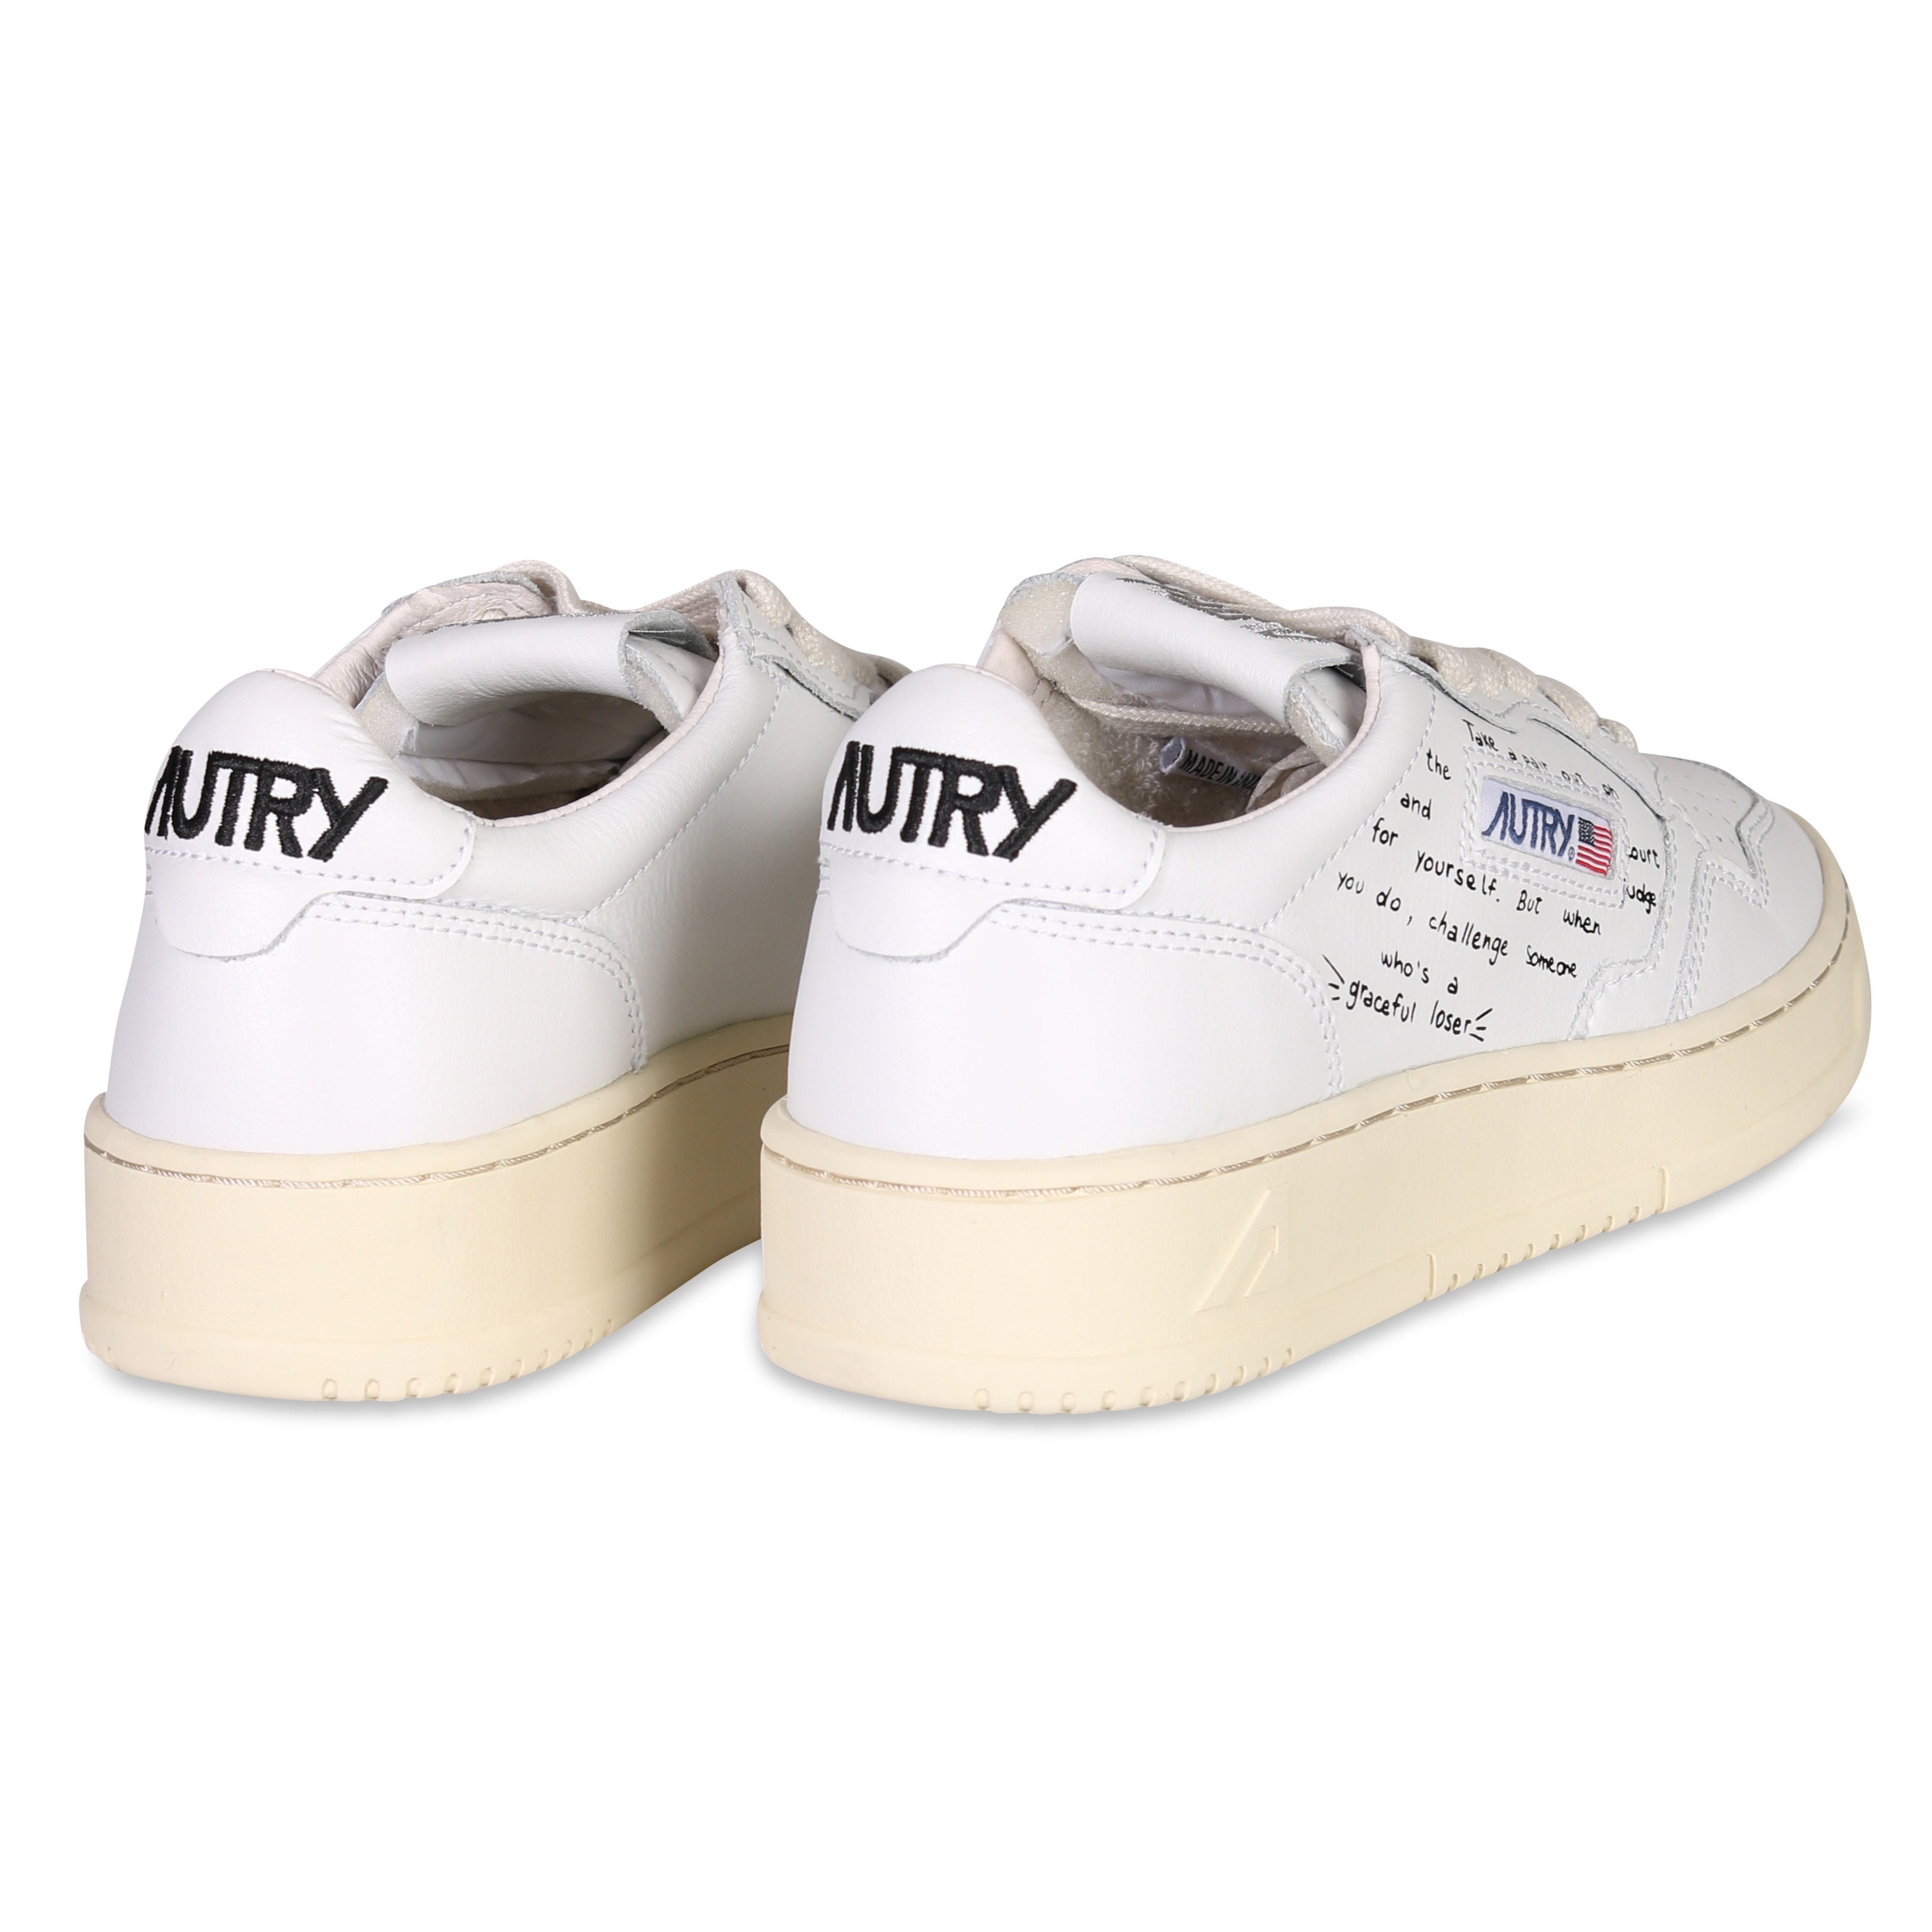 Autry Action Shoes Written Low Sneaker White/Black